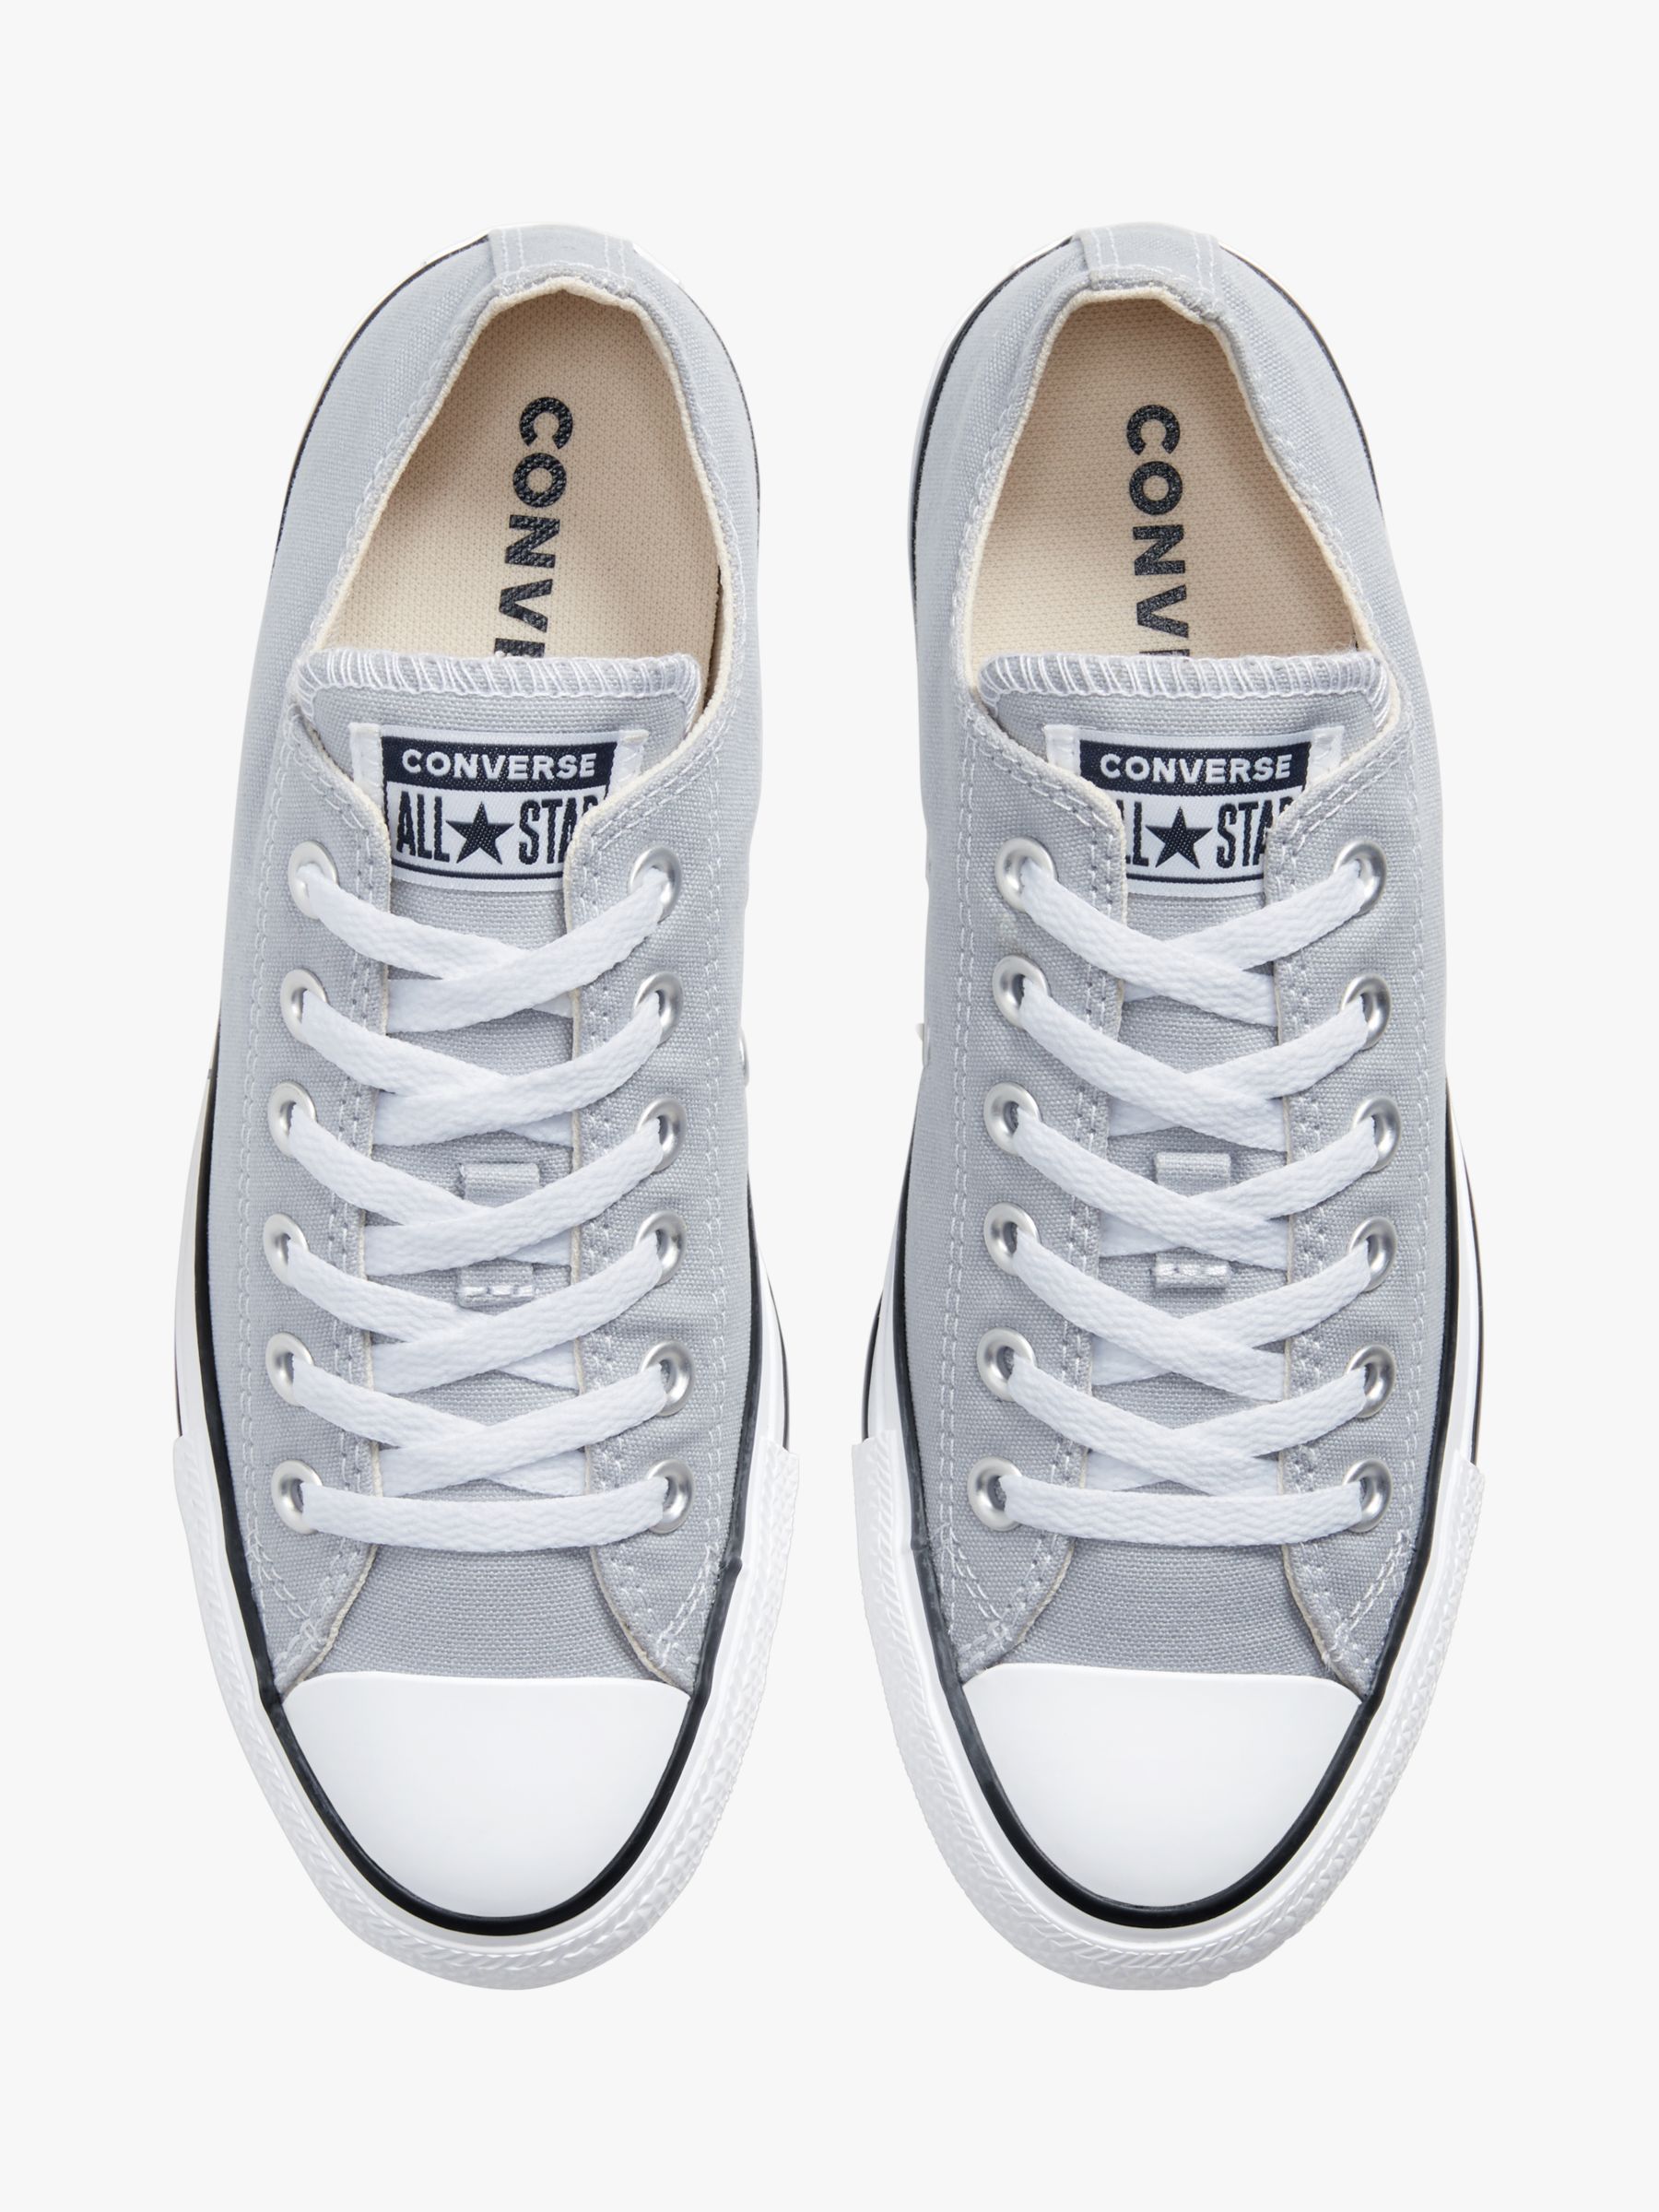 converse all star low tops grey